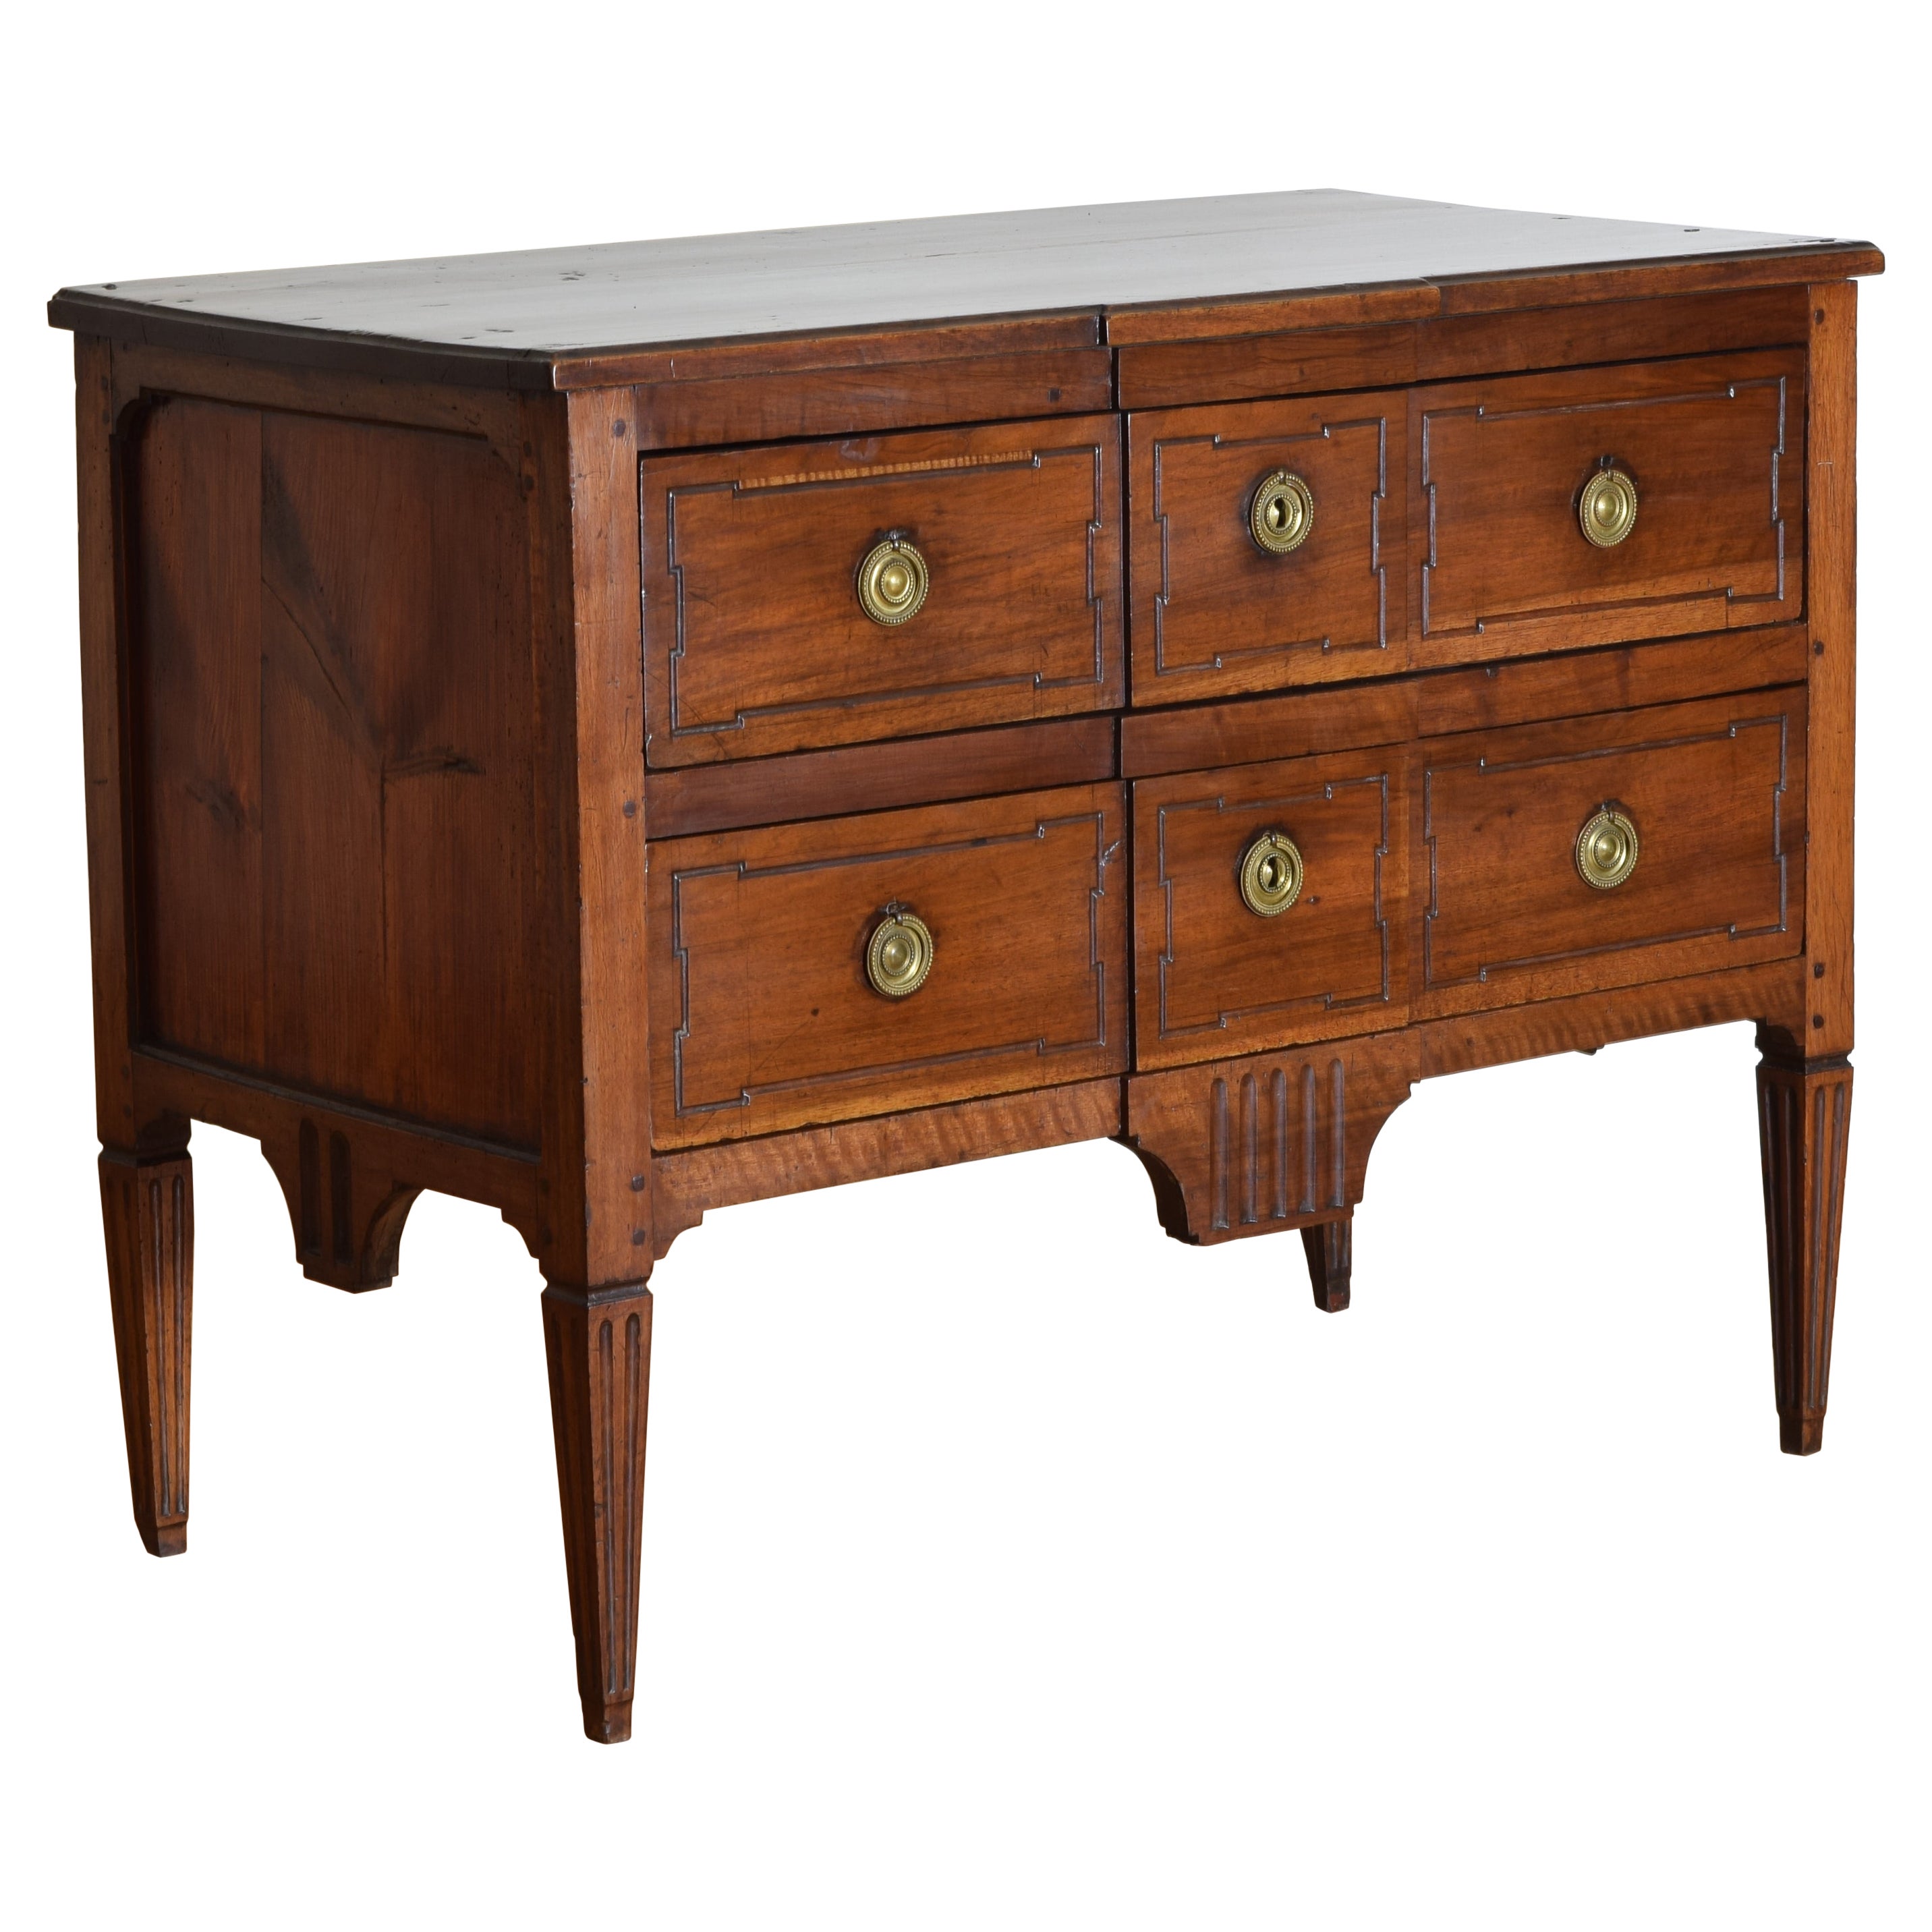 French Directoire Period Walnut 2-Door Commode, 1st quarter 19th century